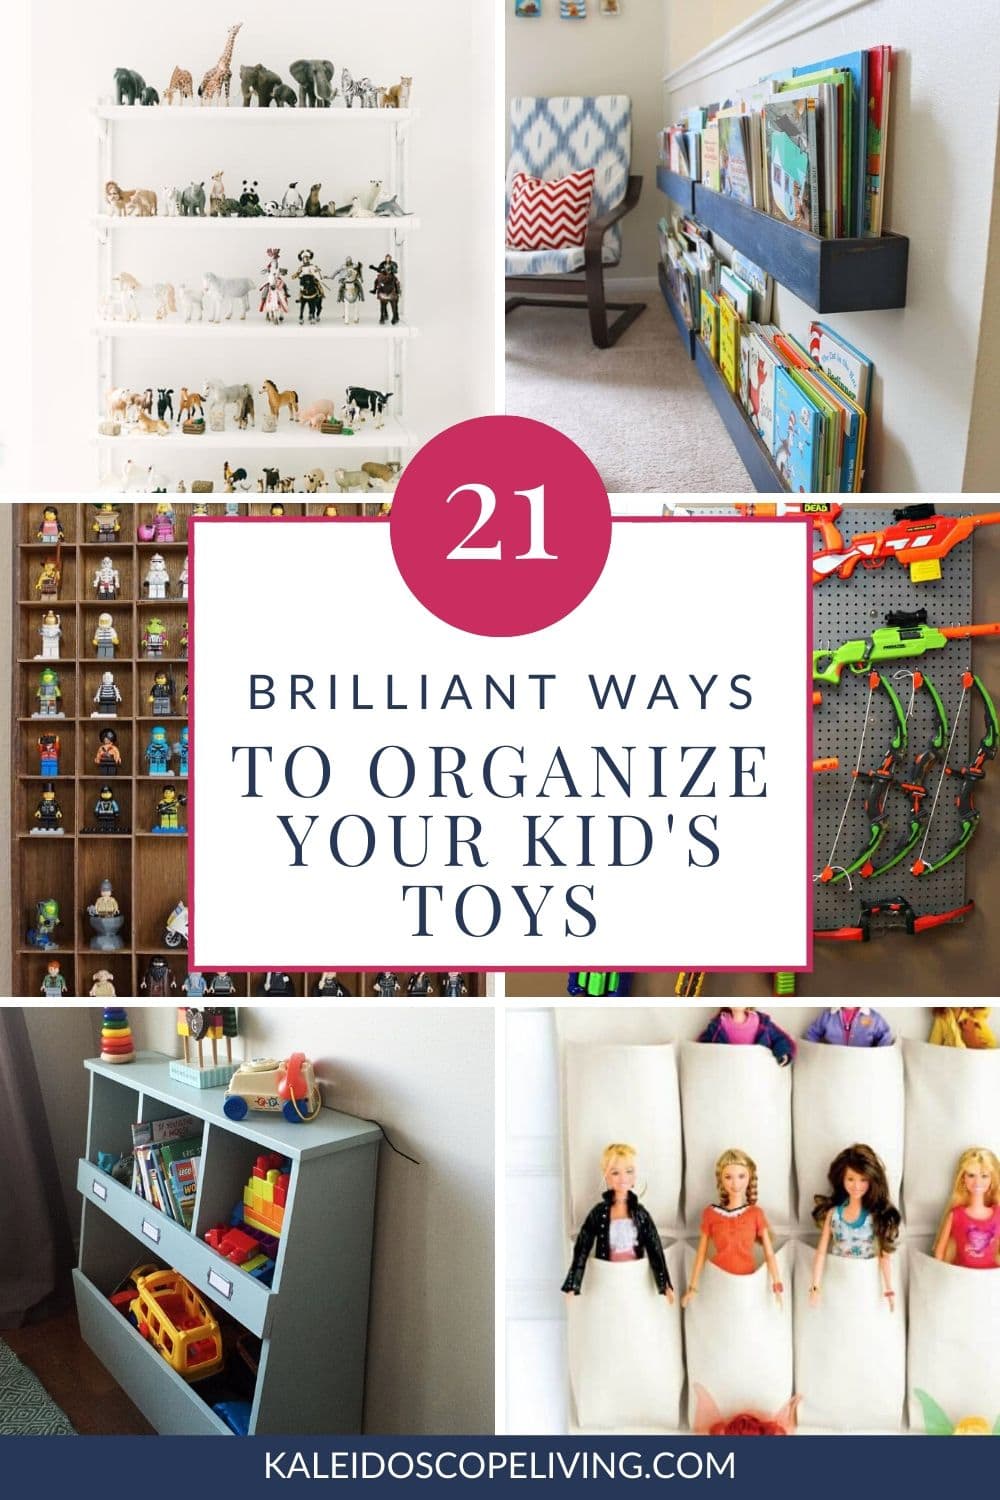 Simple Playroom Storage Ideas to Keep the Mess to a Minimum